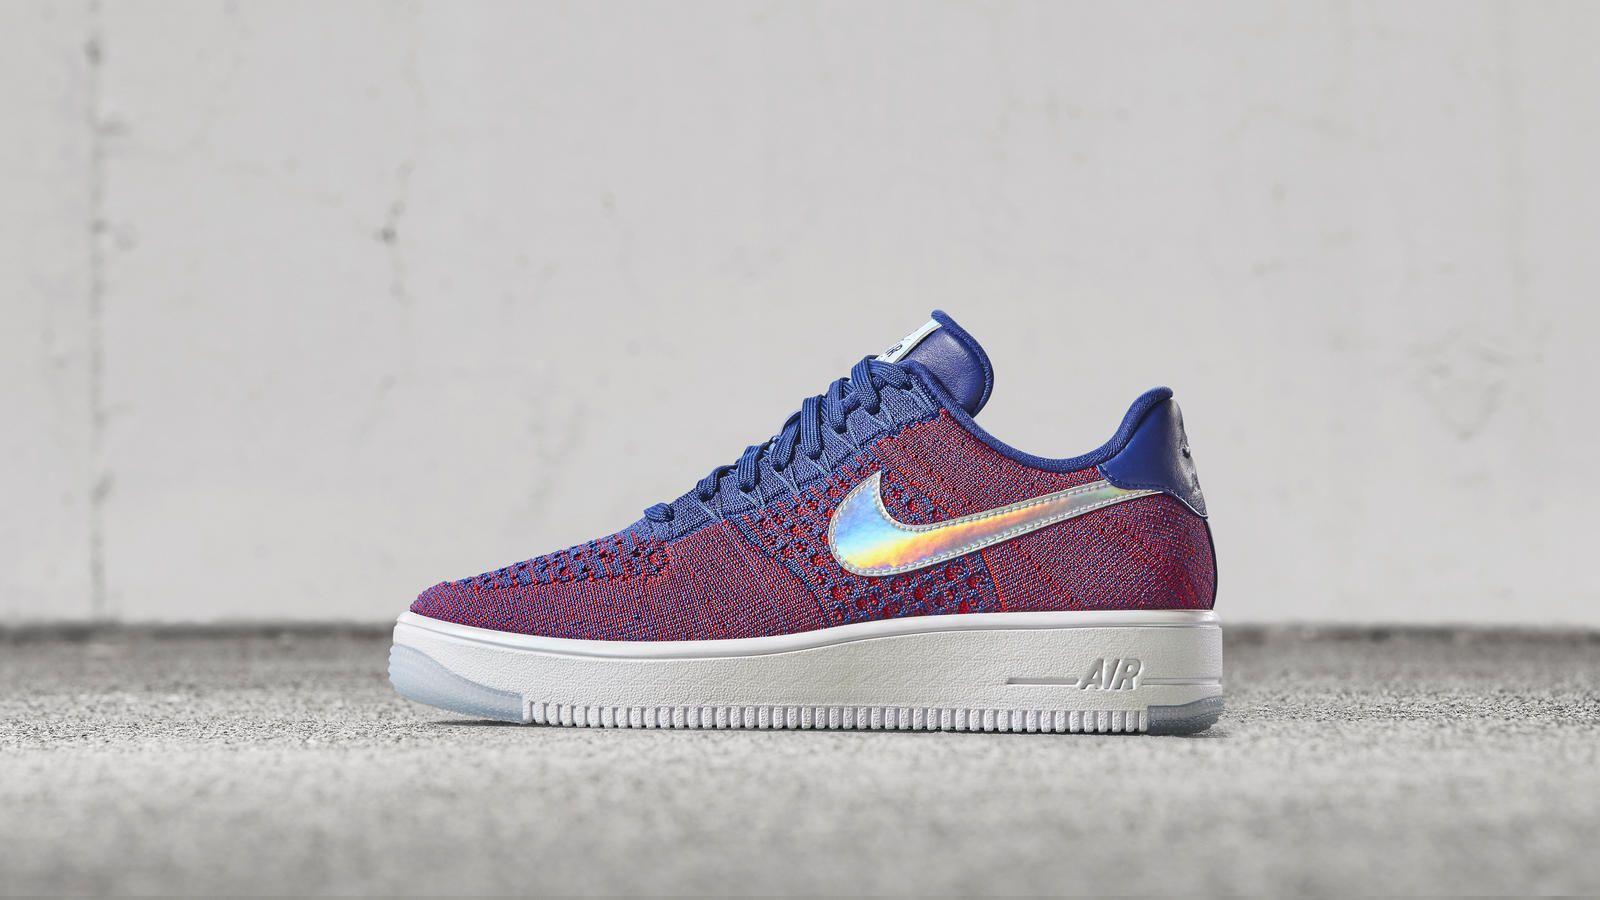 USA Nike Air Force 1 Ultra Flyknit Low